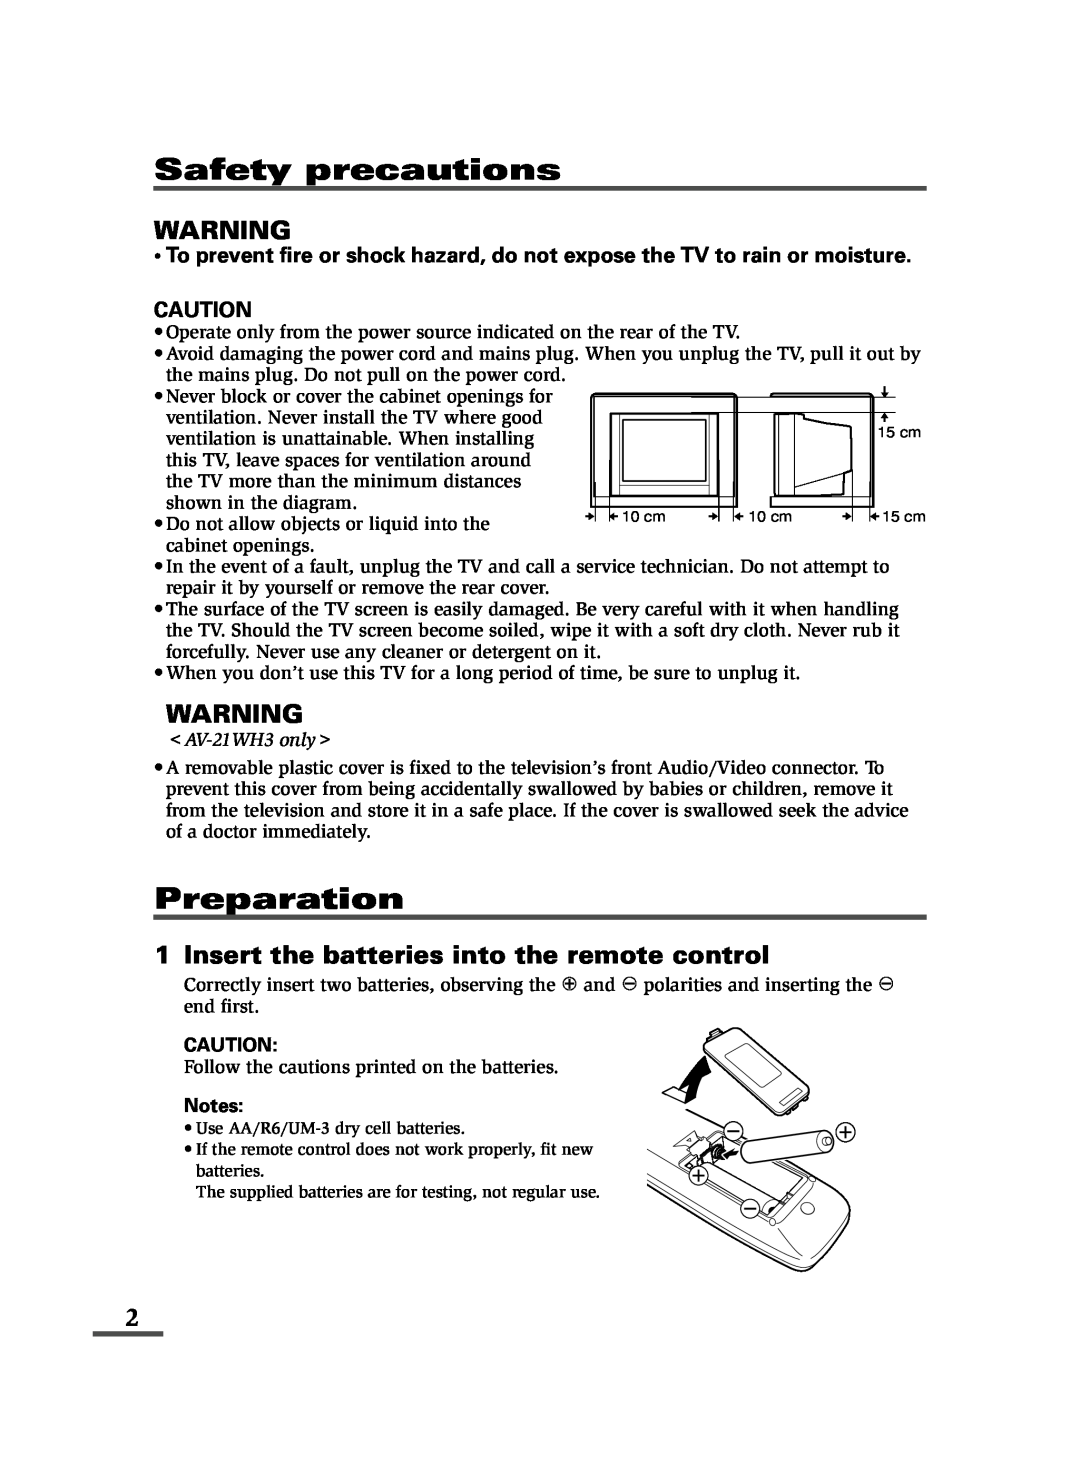 JVC specifications Insert the batteries into the remote control, AV-21WH3 only, Safety precautions, Preparation 